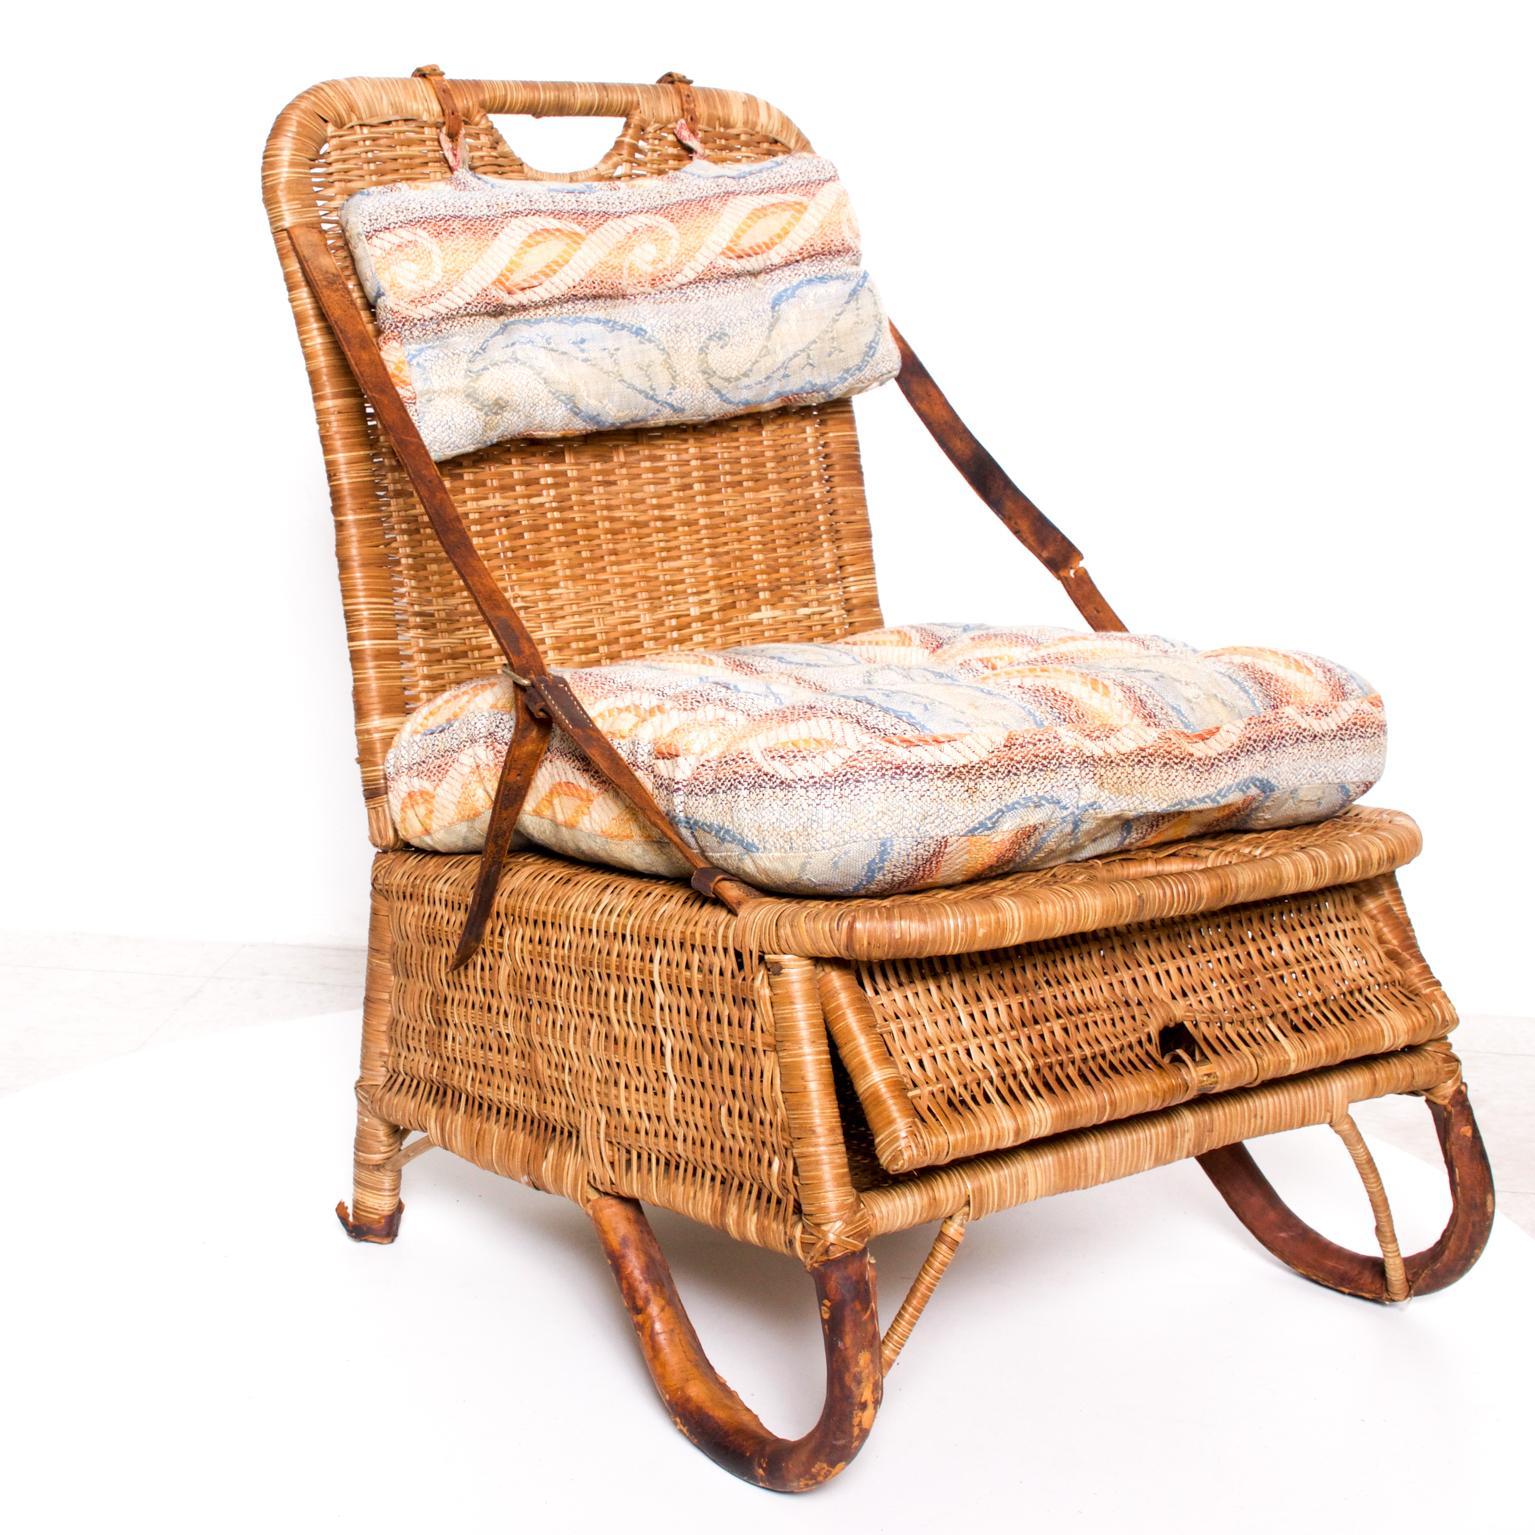 Vintage Folding Beach Chair Woven Wicker and Leather Sculpted Portable Travel 1